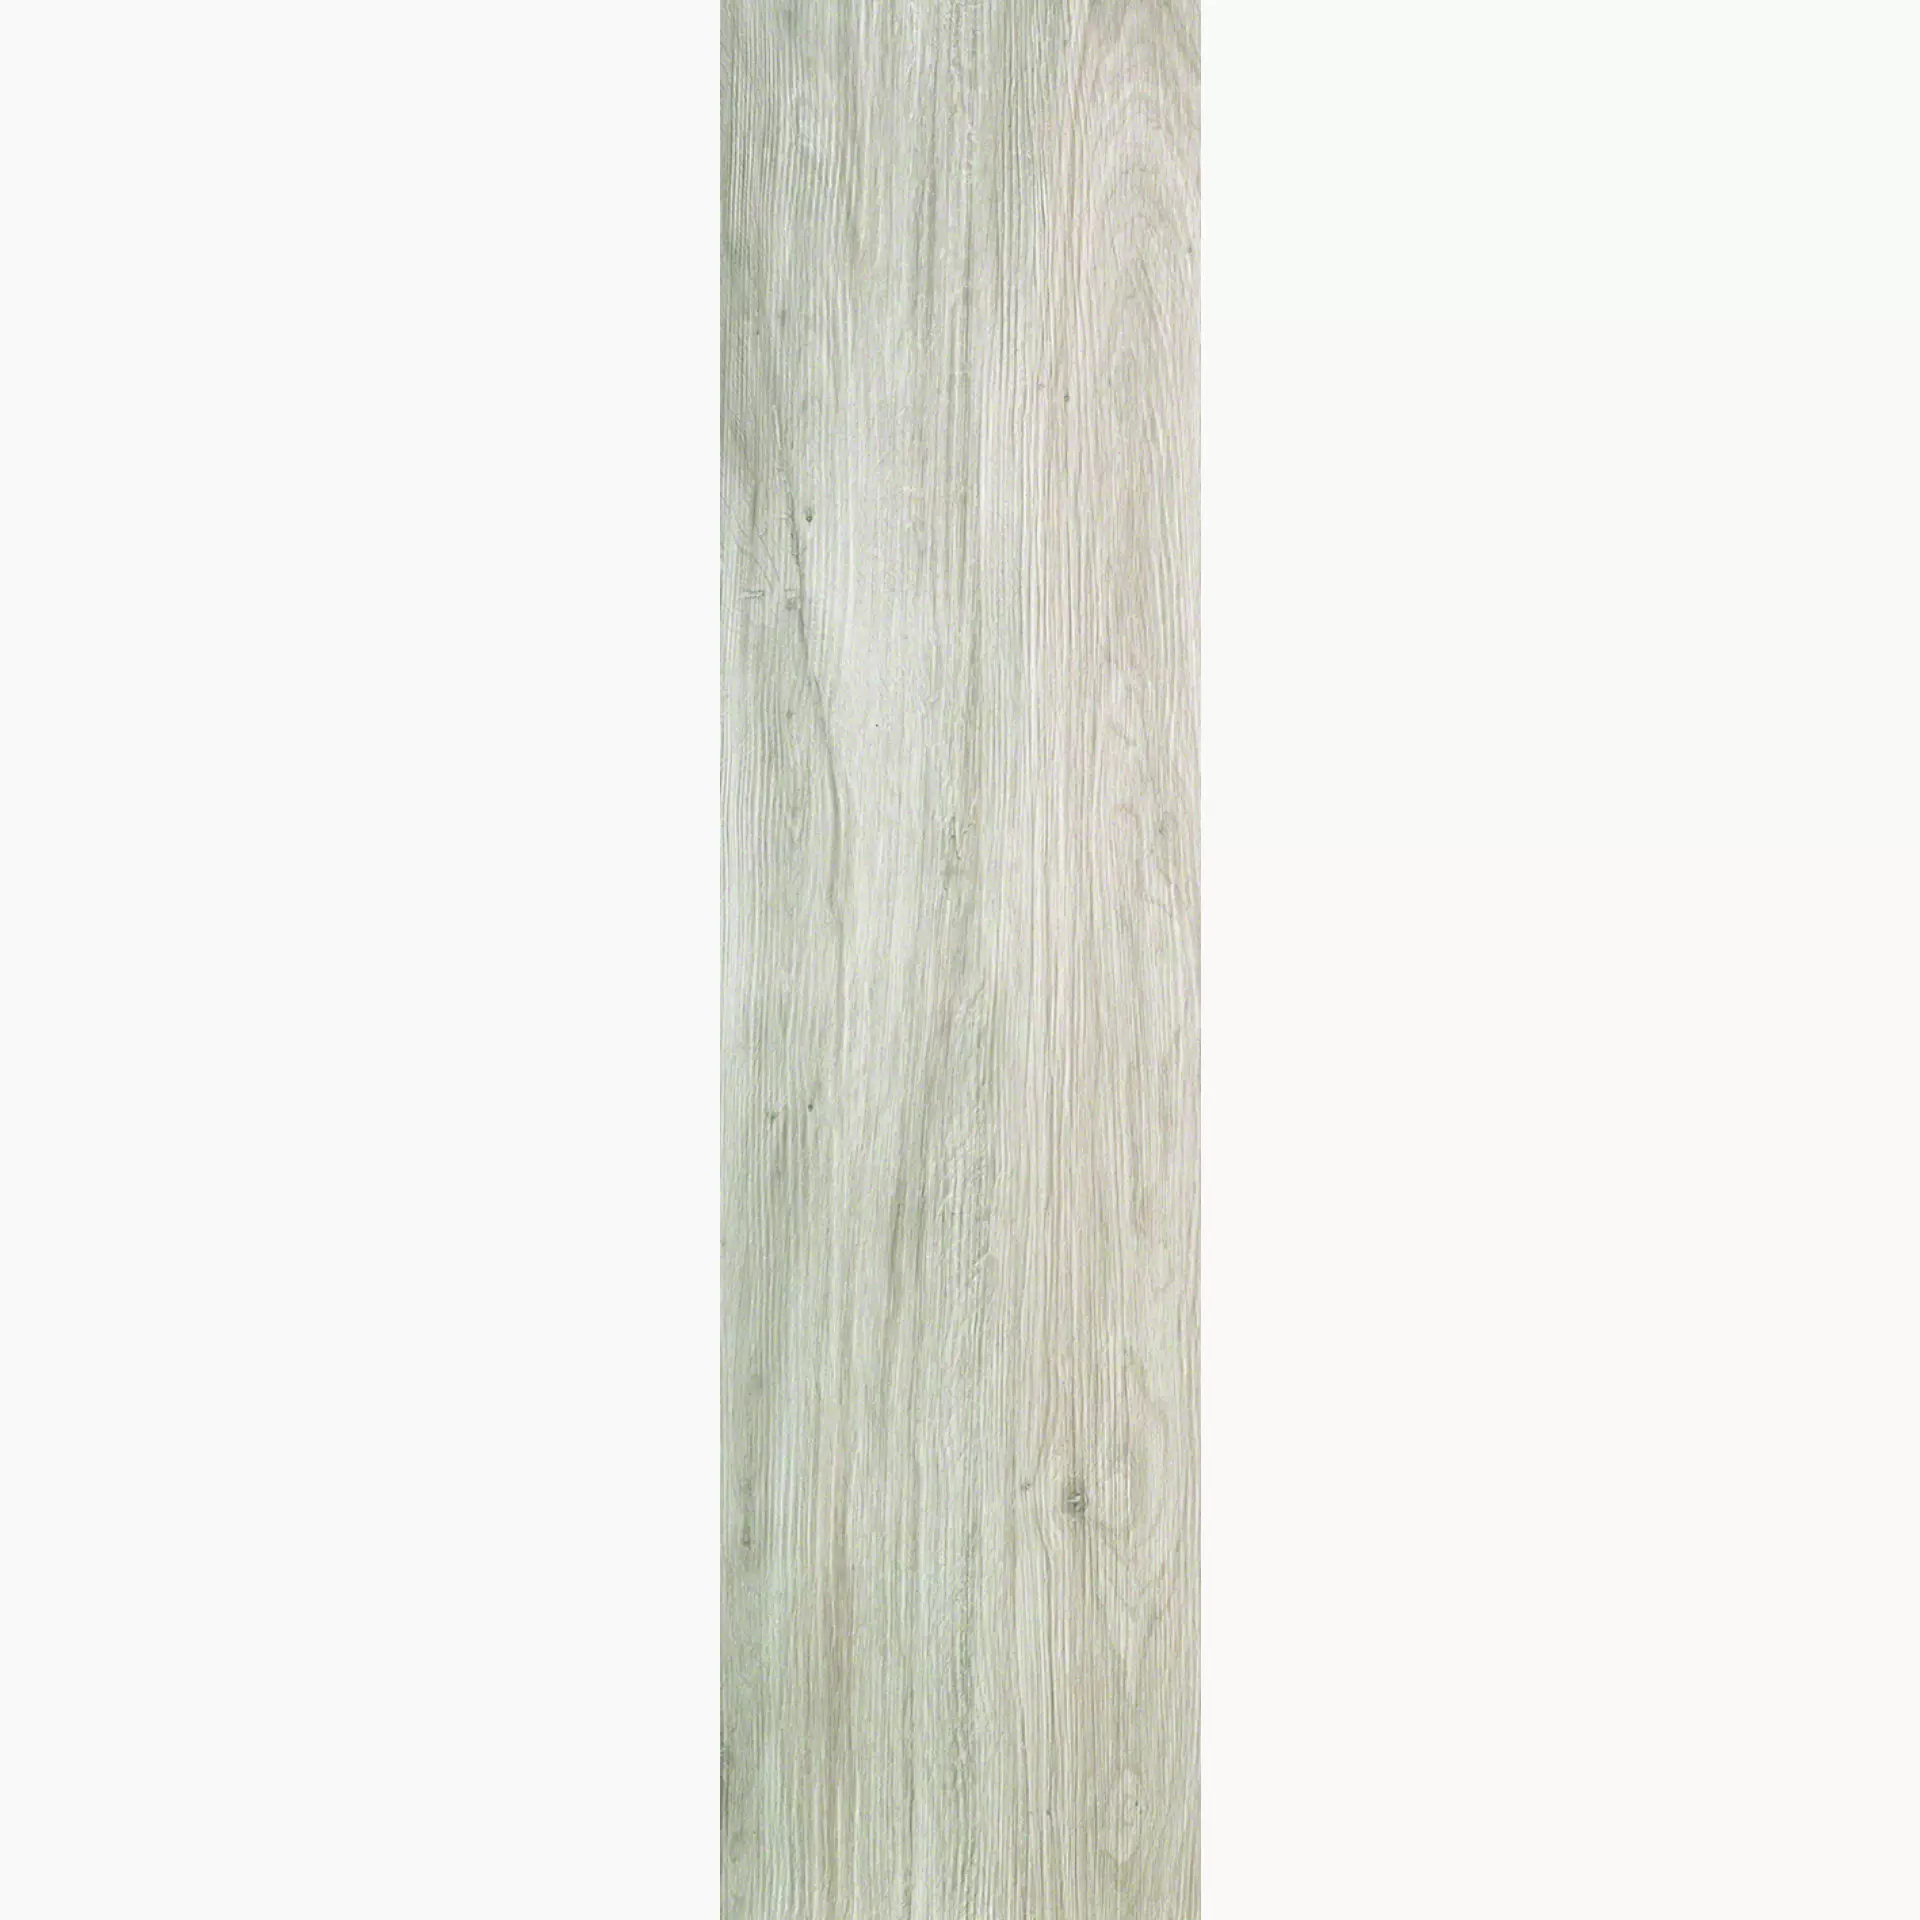 Serenissima Acanto Bianco Naturale 1047706 30x120cm rectified 9,5mm